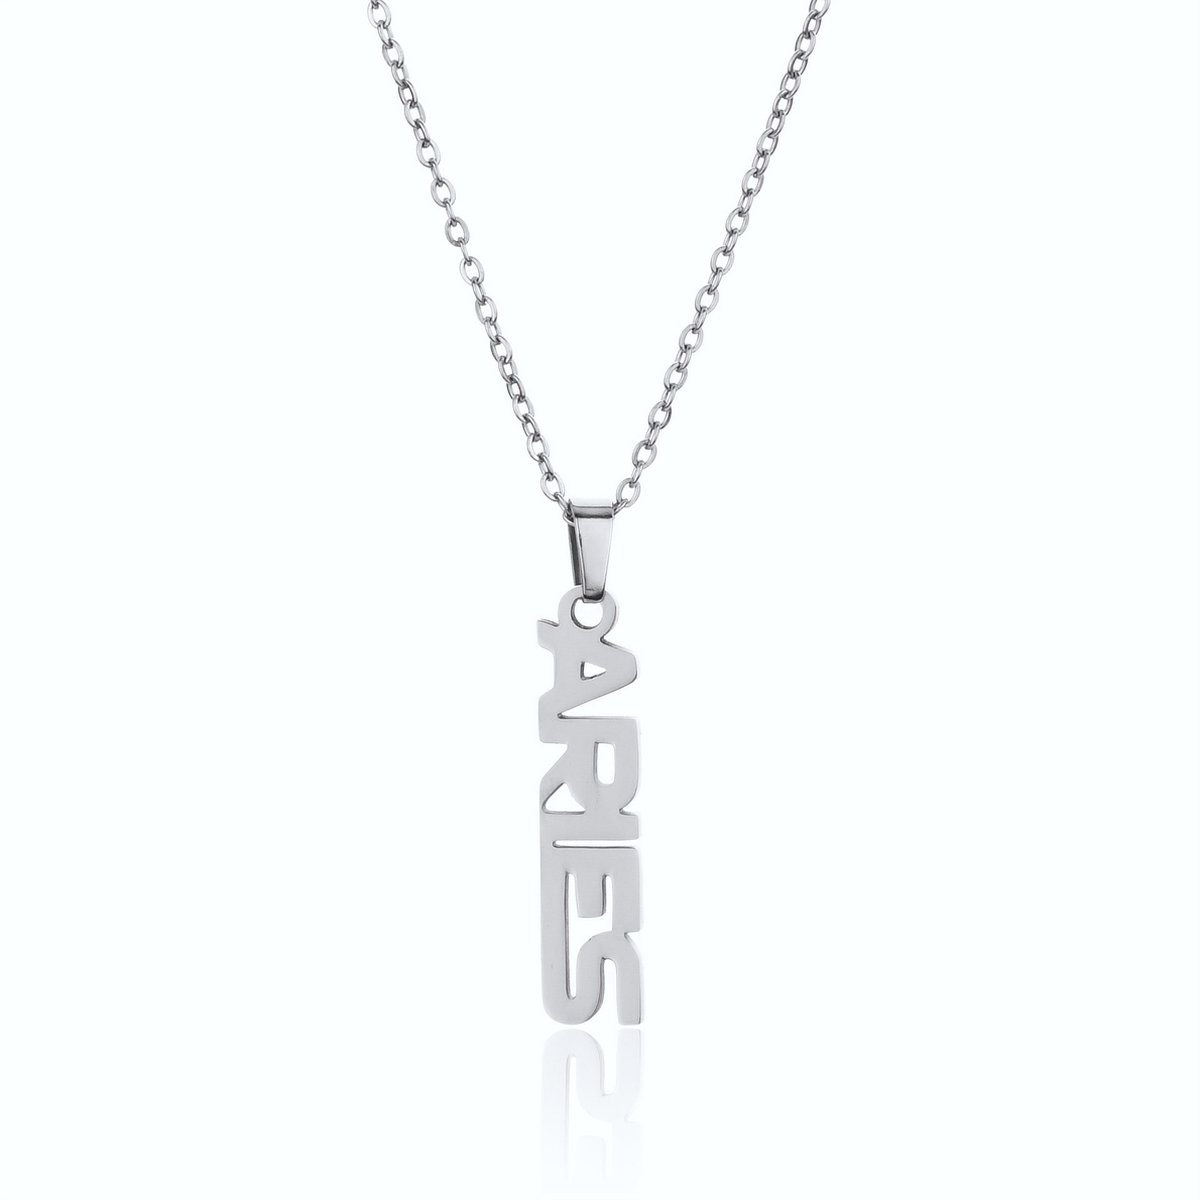 ICYBOY 18K Roestvrije Stalen Ketting Met Zodiac Sterrenbeeld Letters Pendant [Ram] [45 cm] Silver Plating Stainless Steel Letter Necklace Vertical Horoscope Necklace